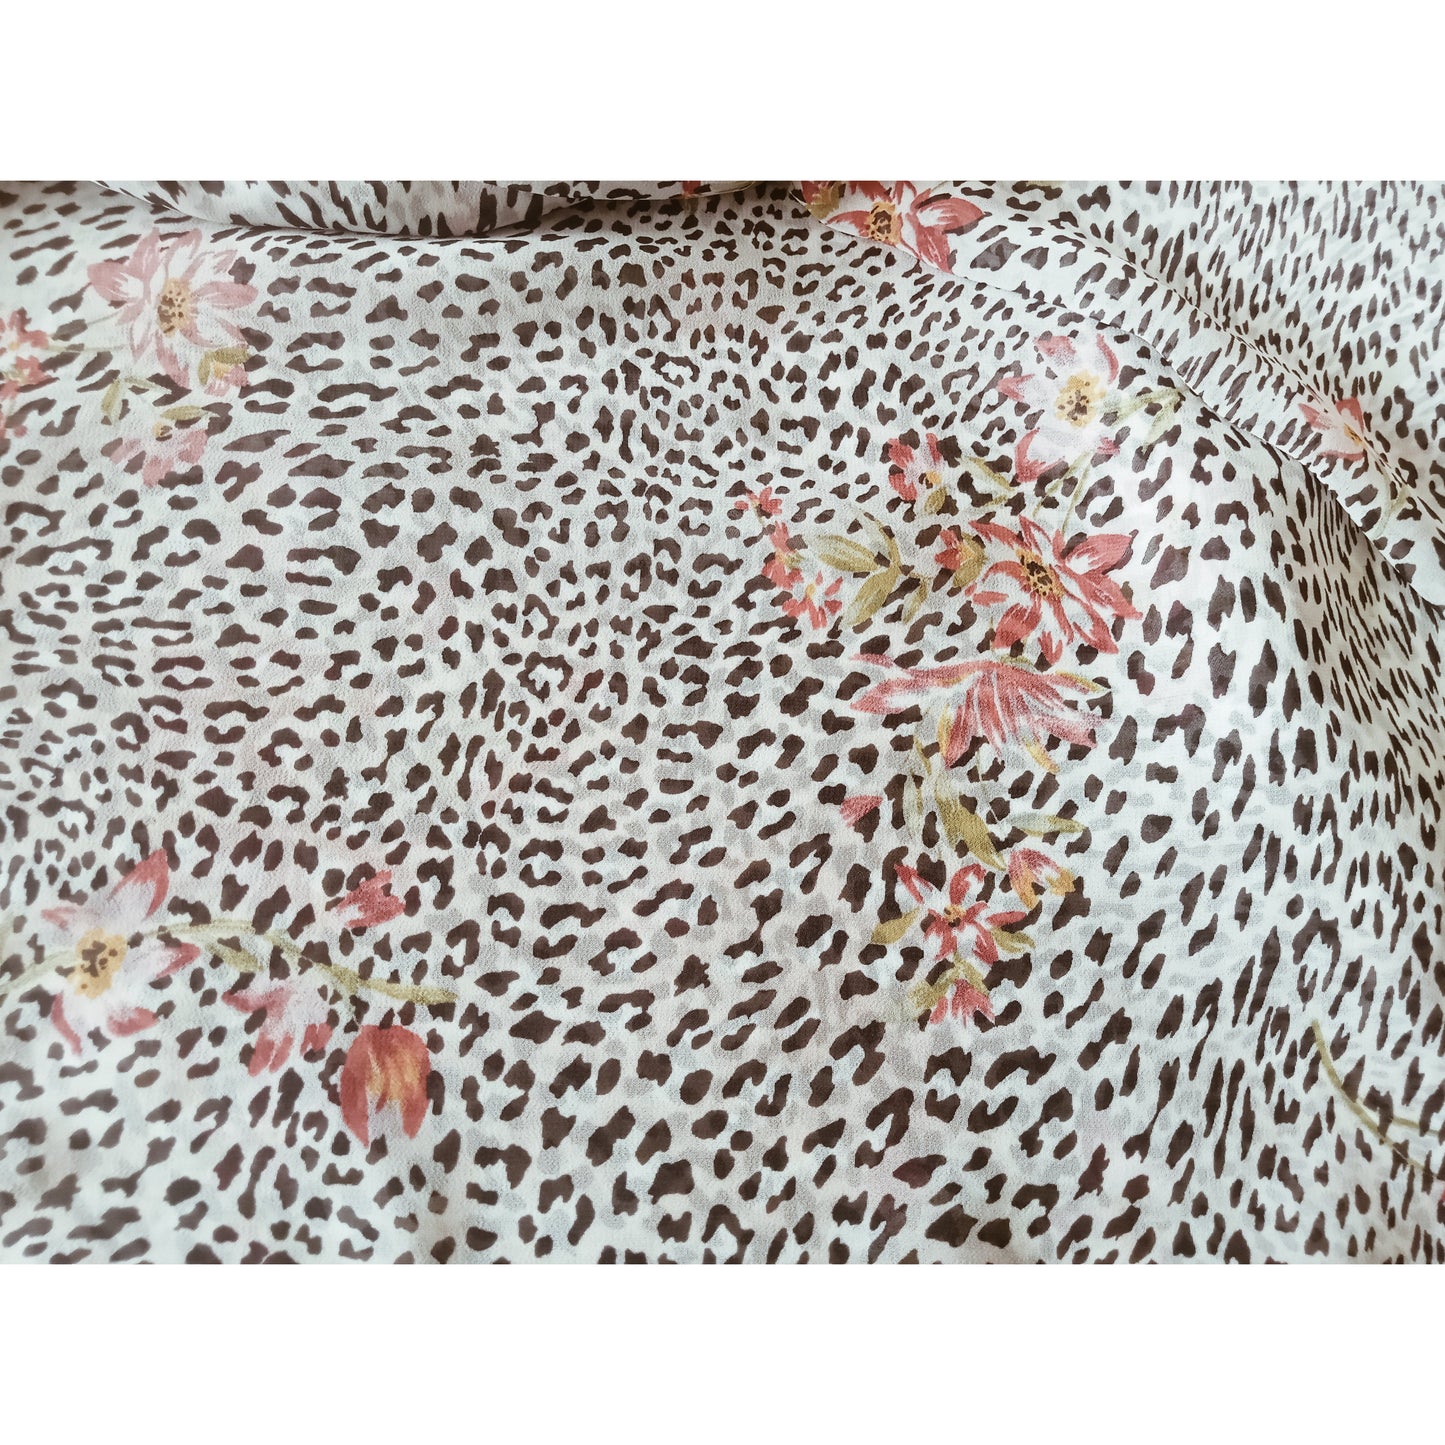 Bella - Leopard/floral printed chiffon- sold by 1/2mtr